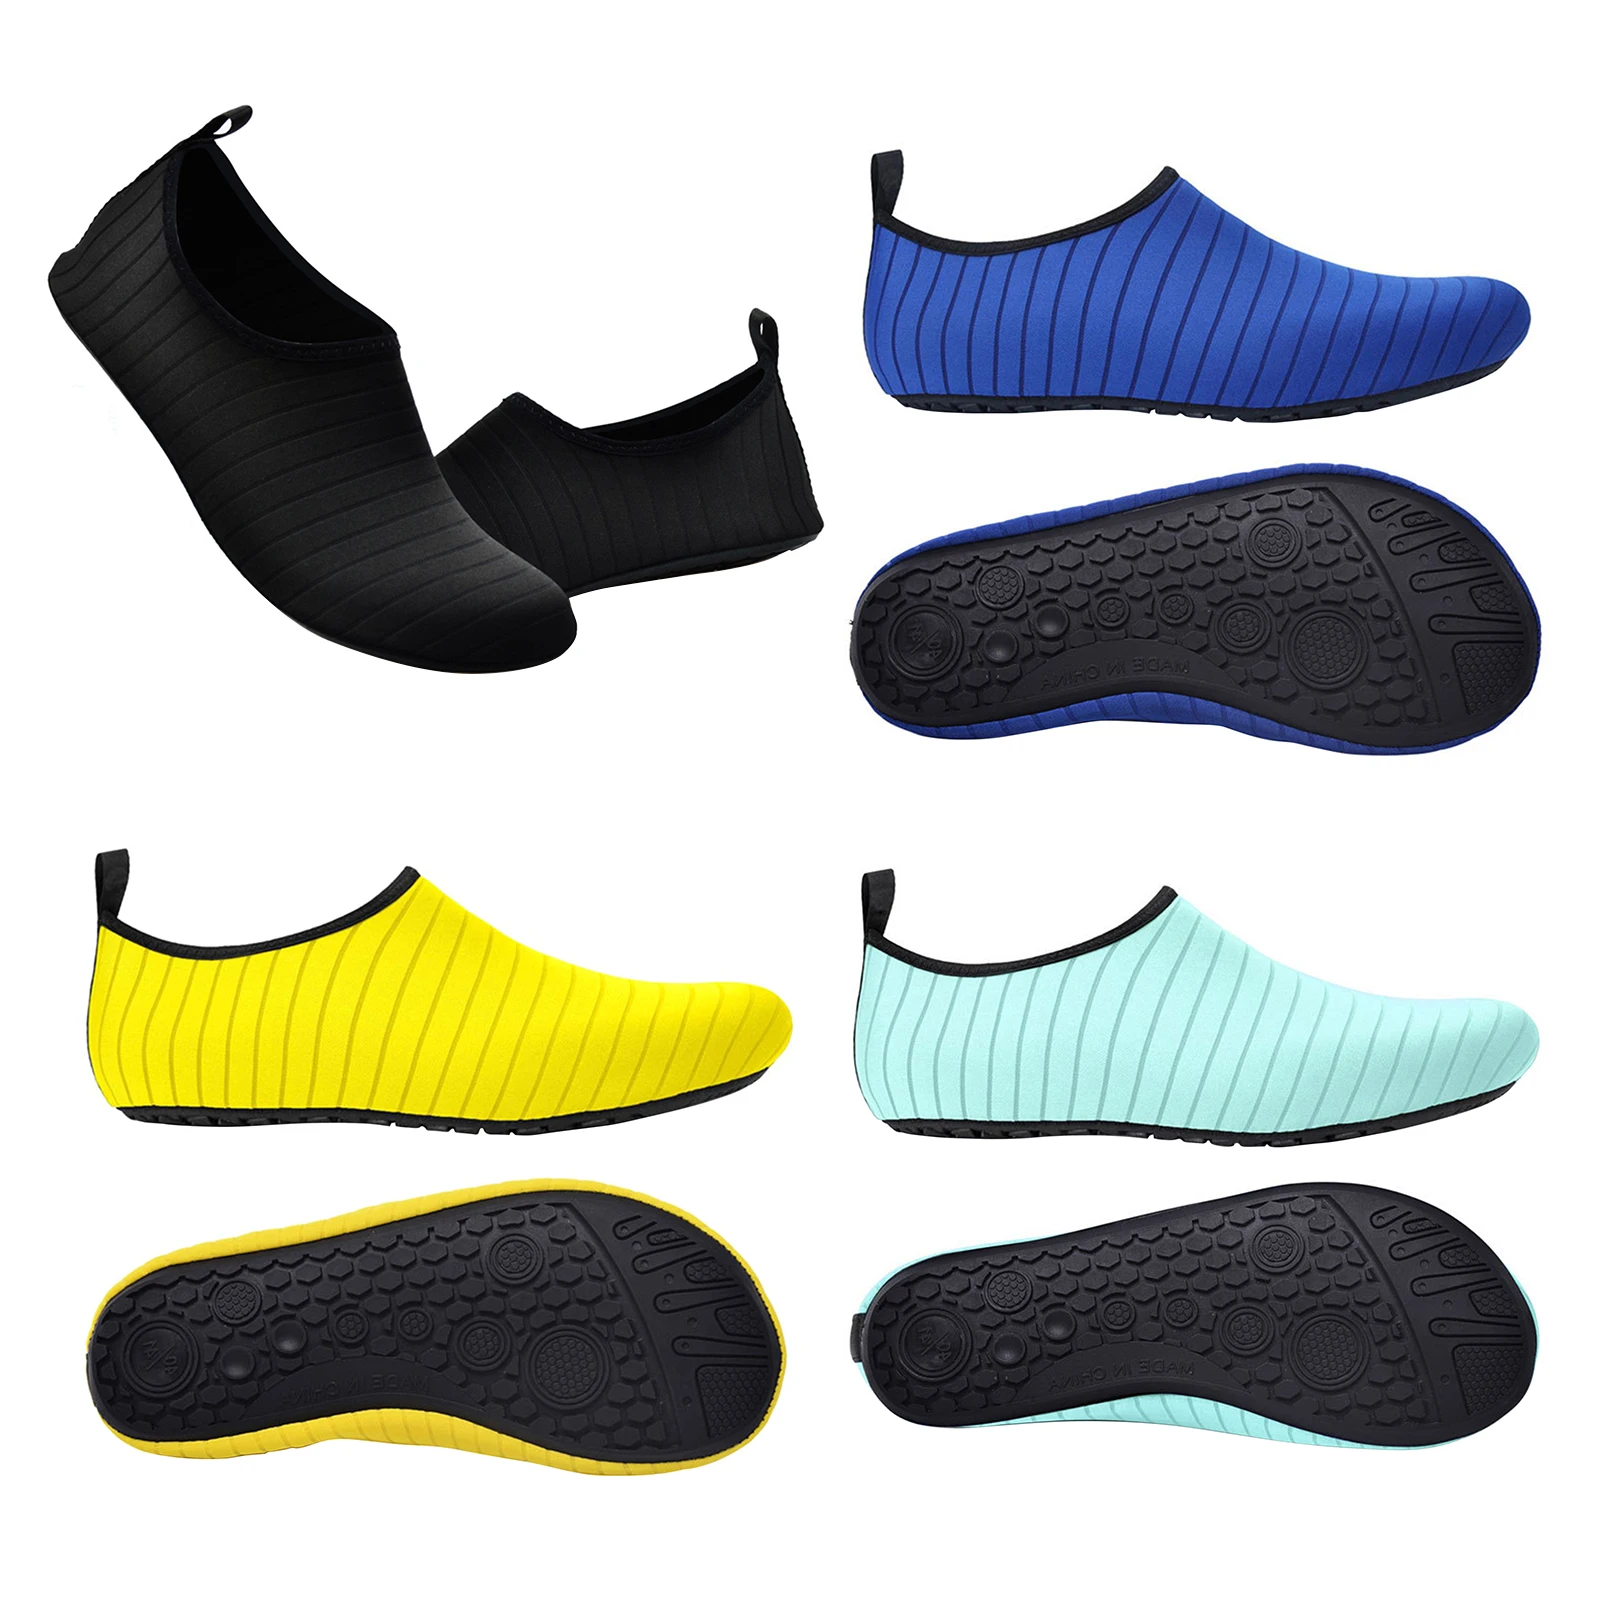 Adult Kid Water Shoes Barefoot Quick-Dry Beach Yoga Swim Sports Exercise Socks 